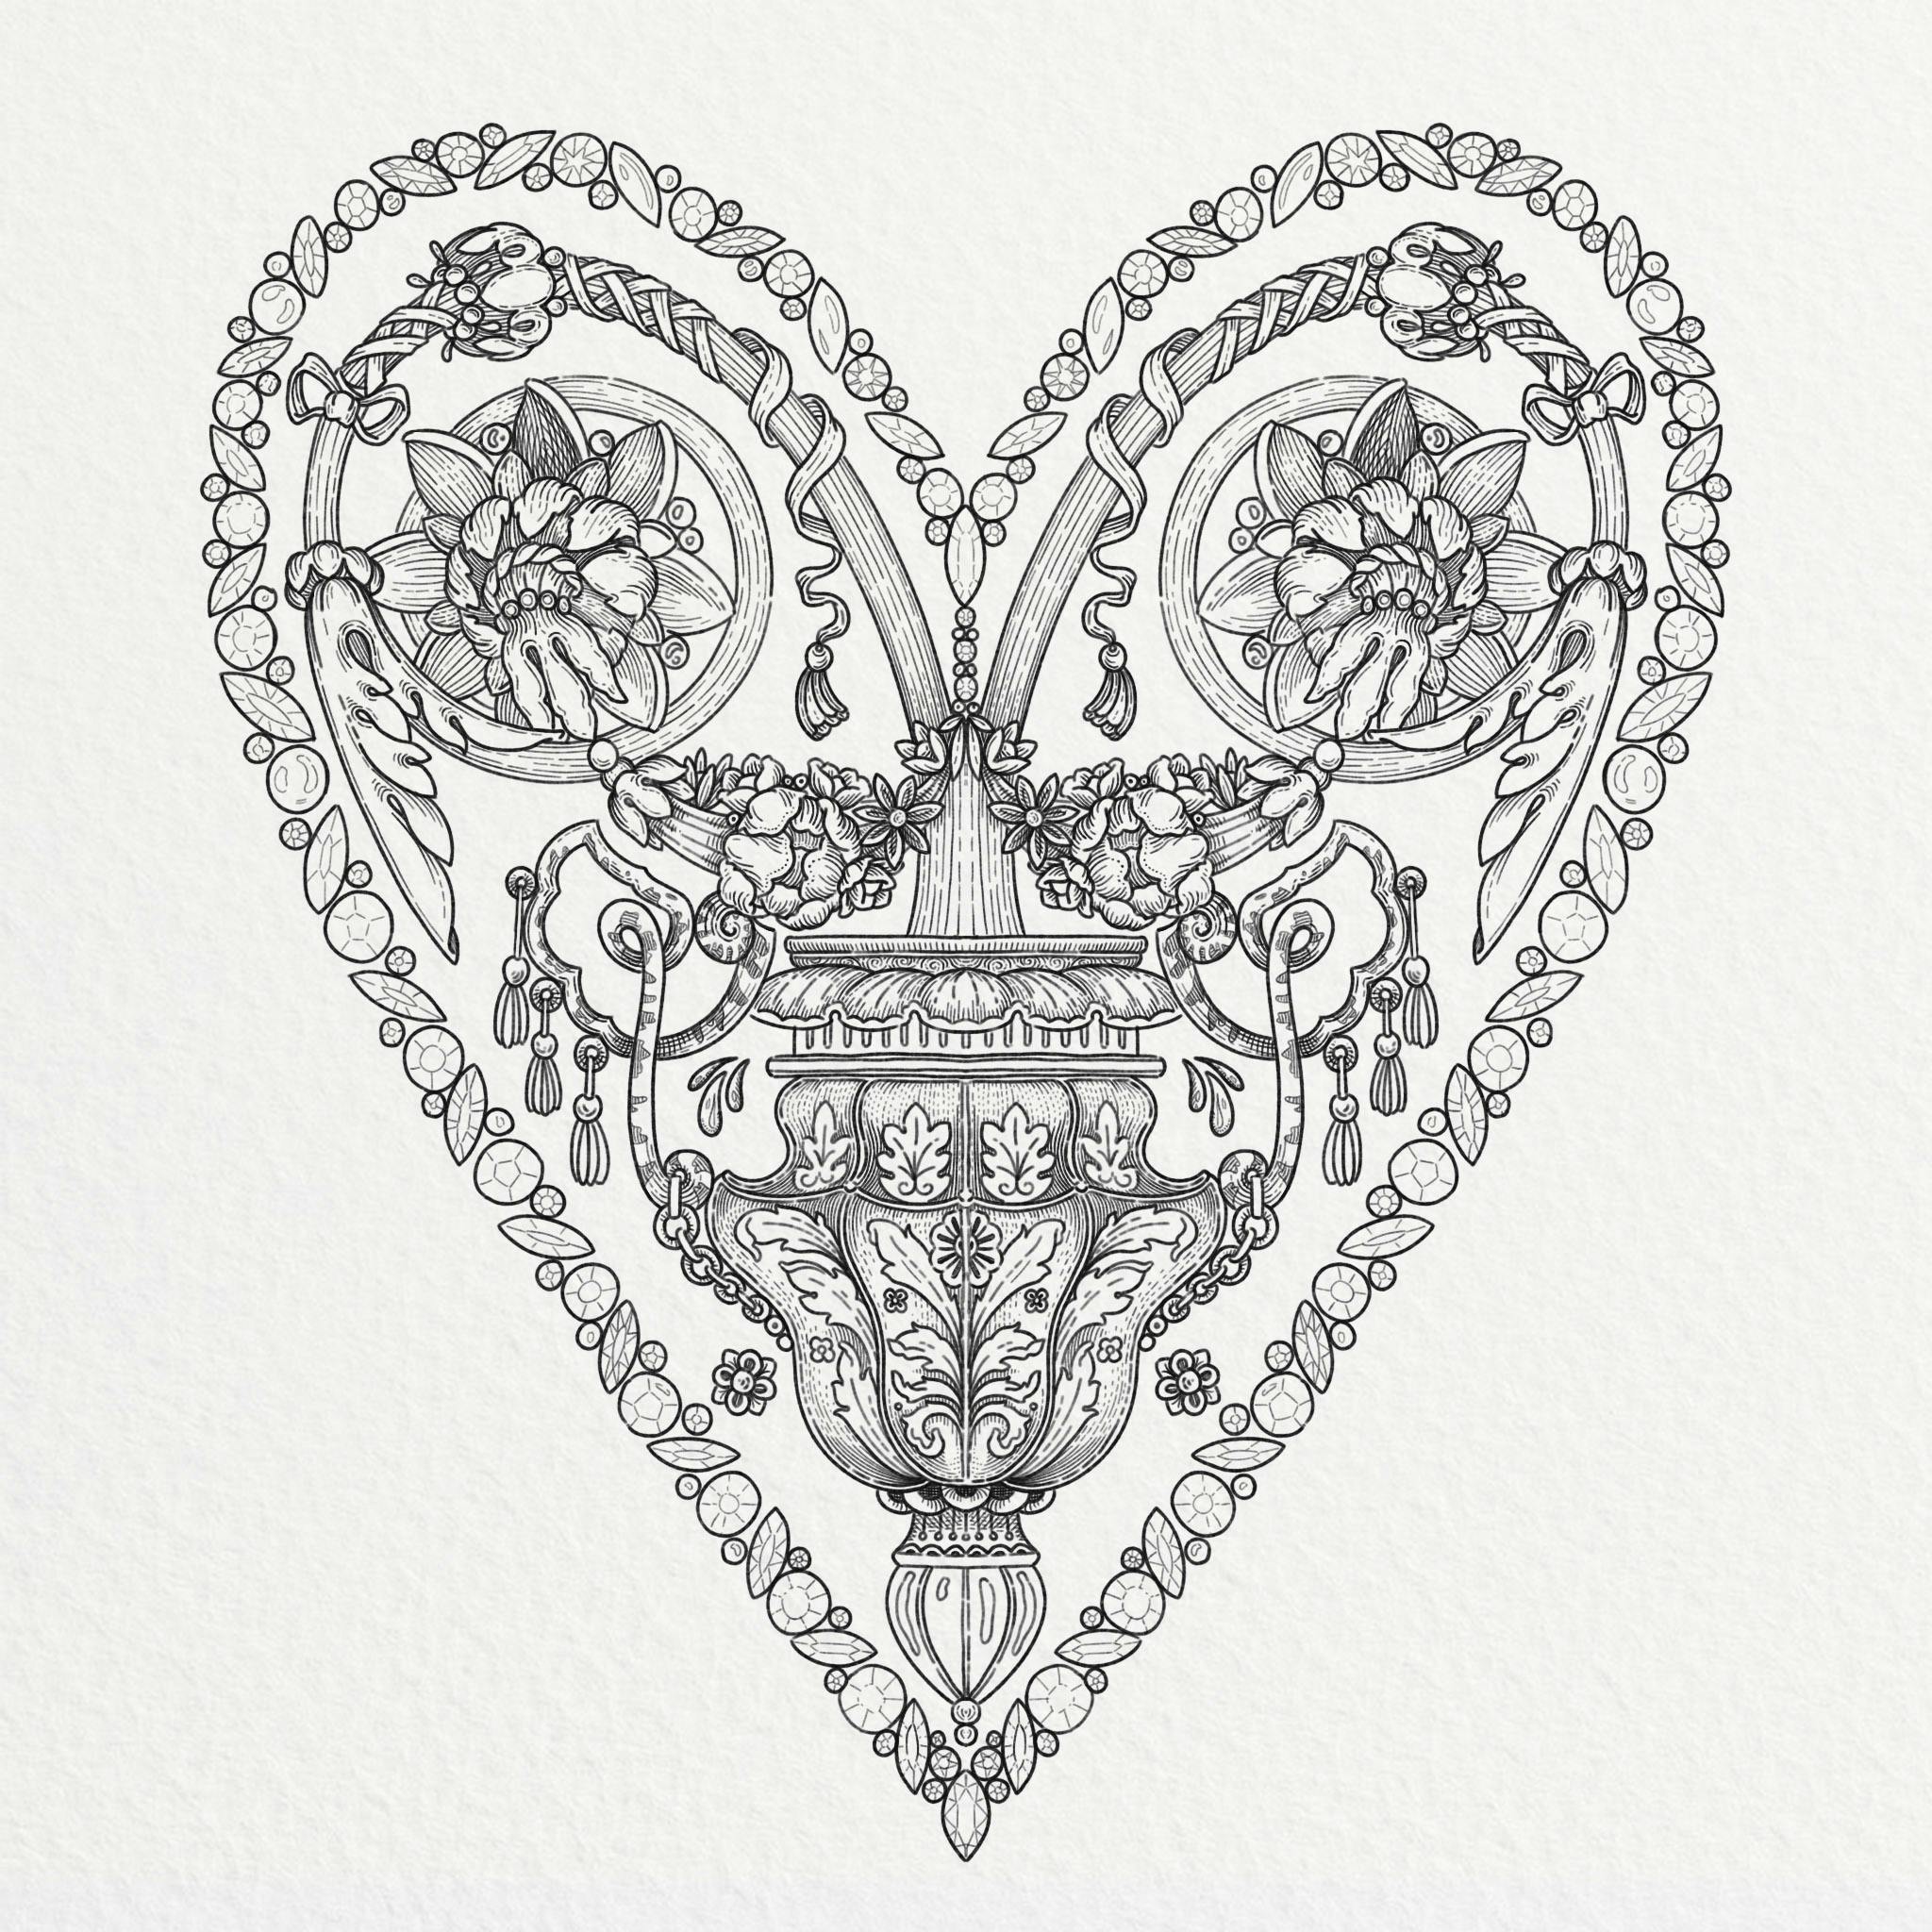 Ornemented heart illustration with arabesques and flowers